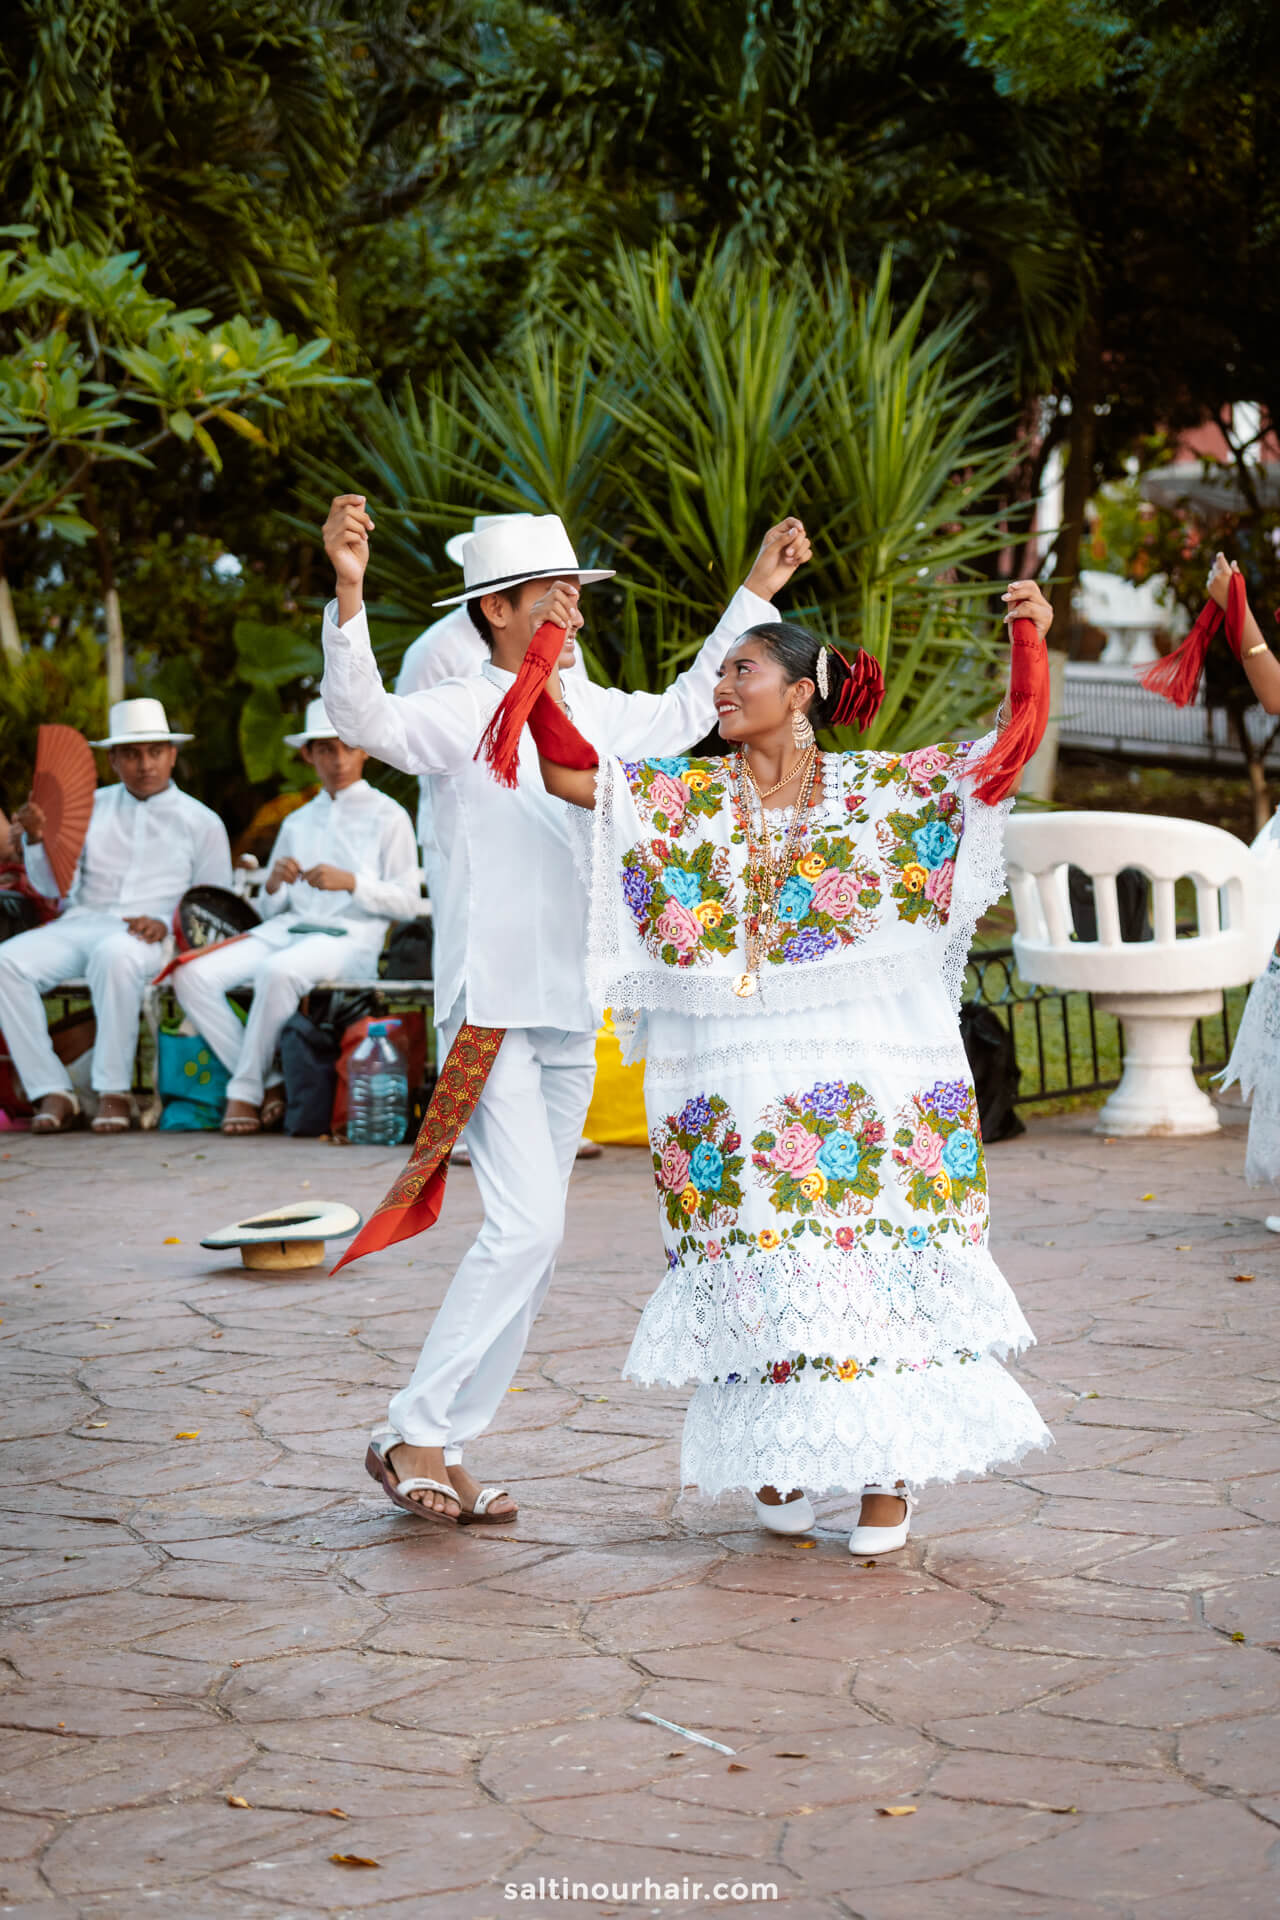 traditional dance performance things to do in Valladolid mexico